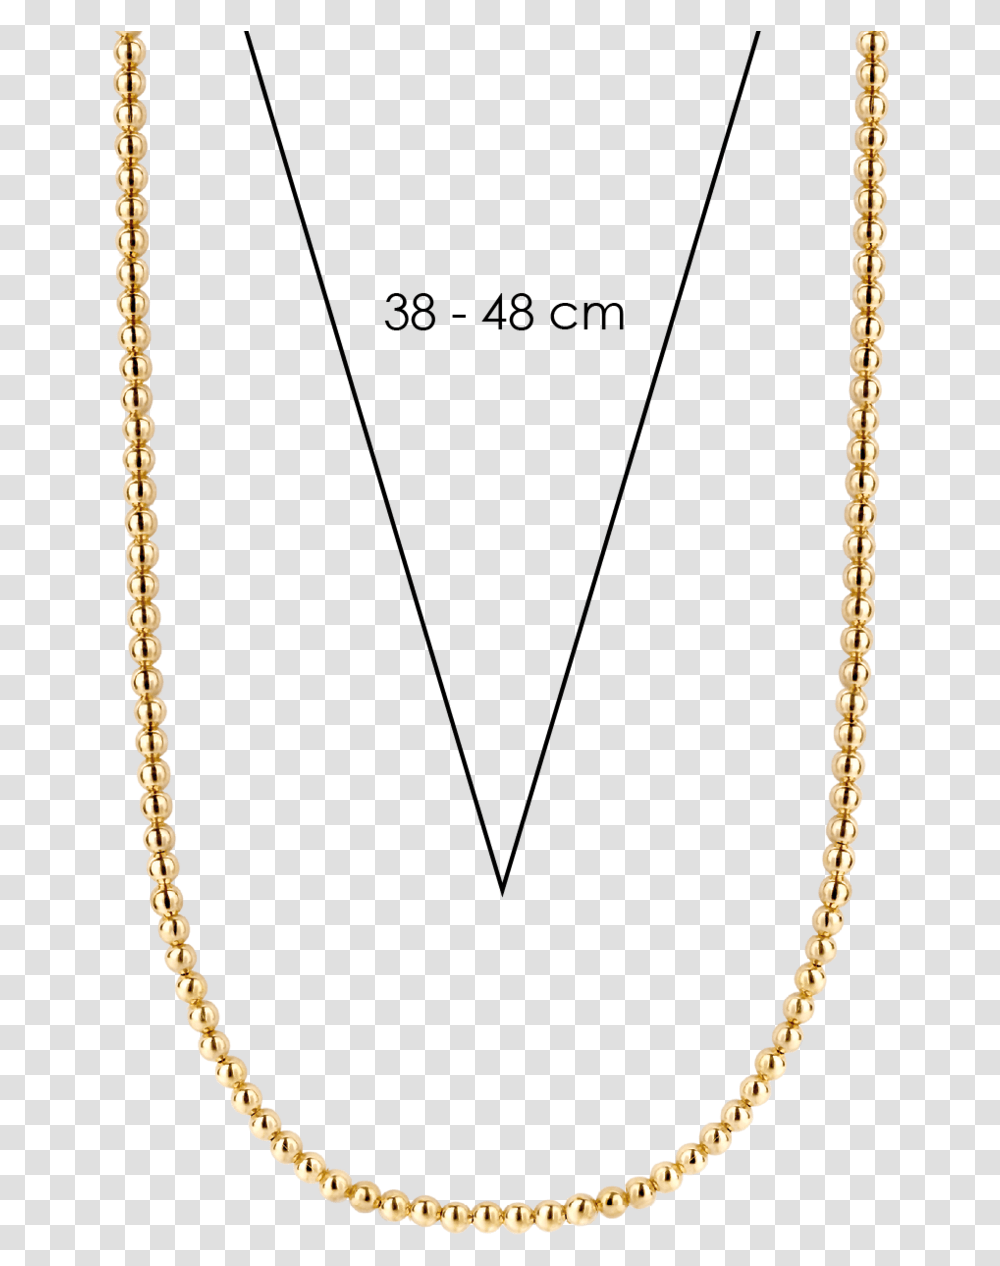 Necklace, Bead Necklace, Jewelry, Ornament, Accessories Transparent Png